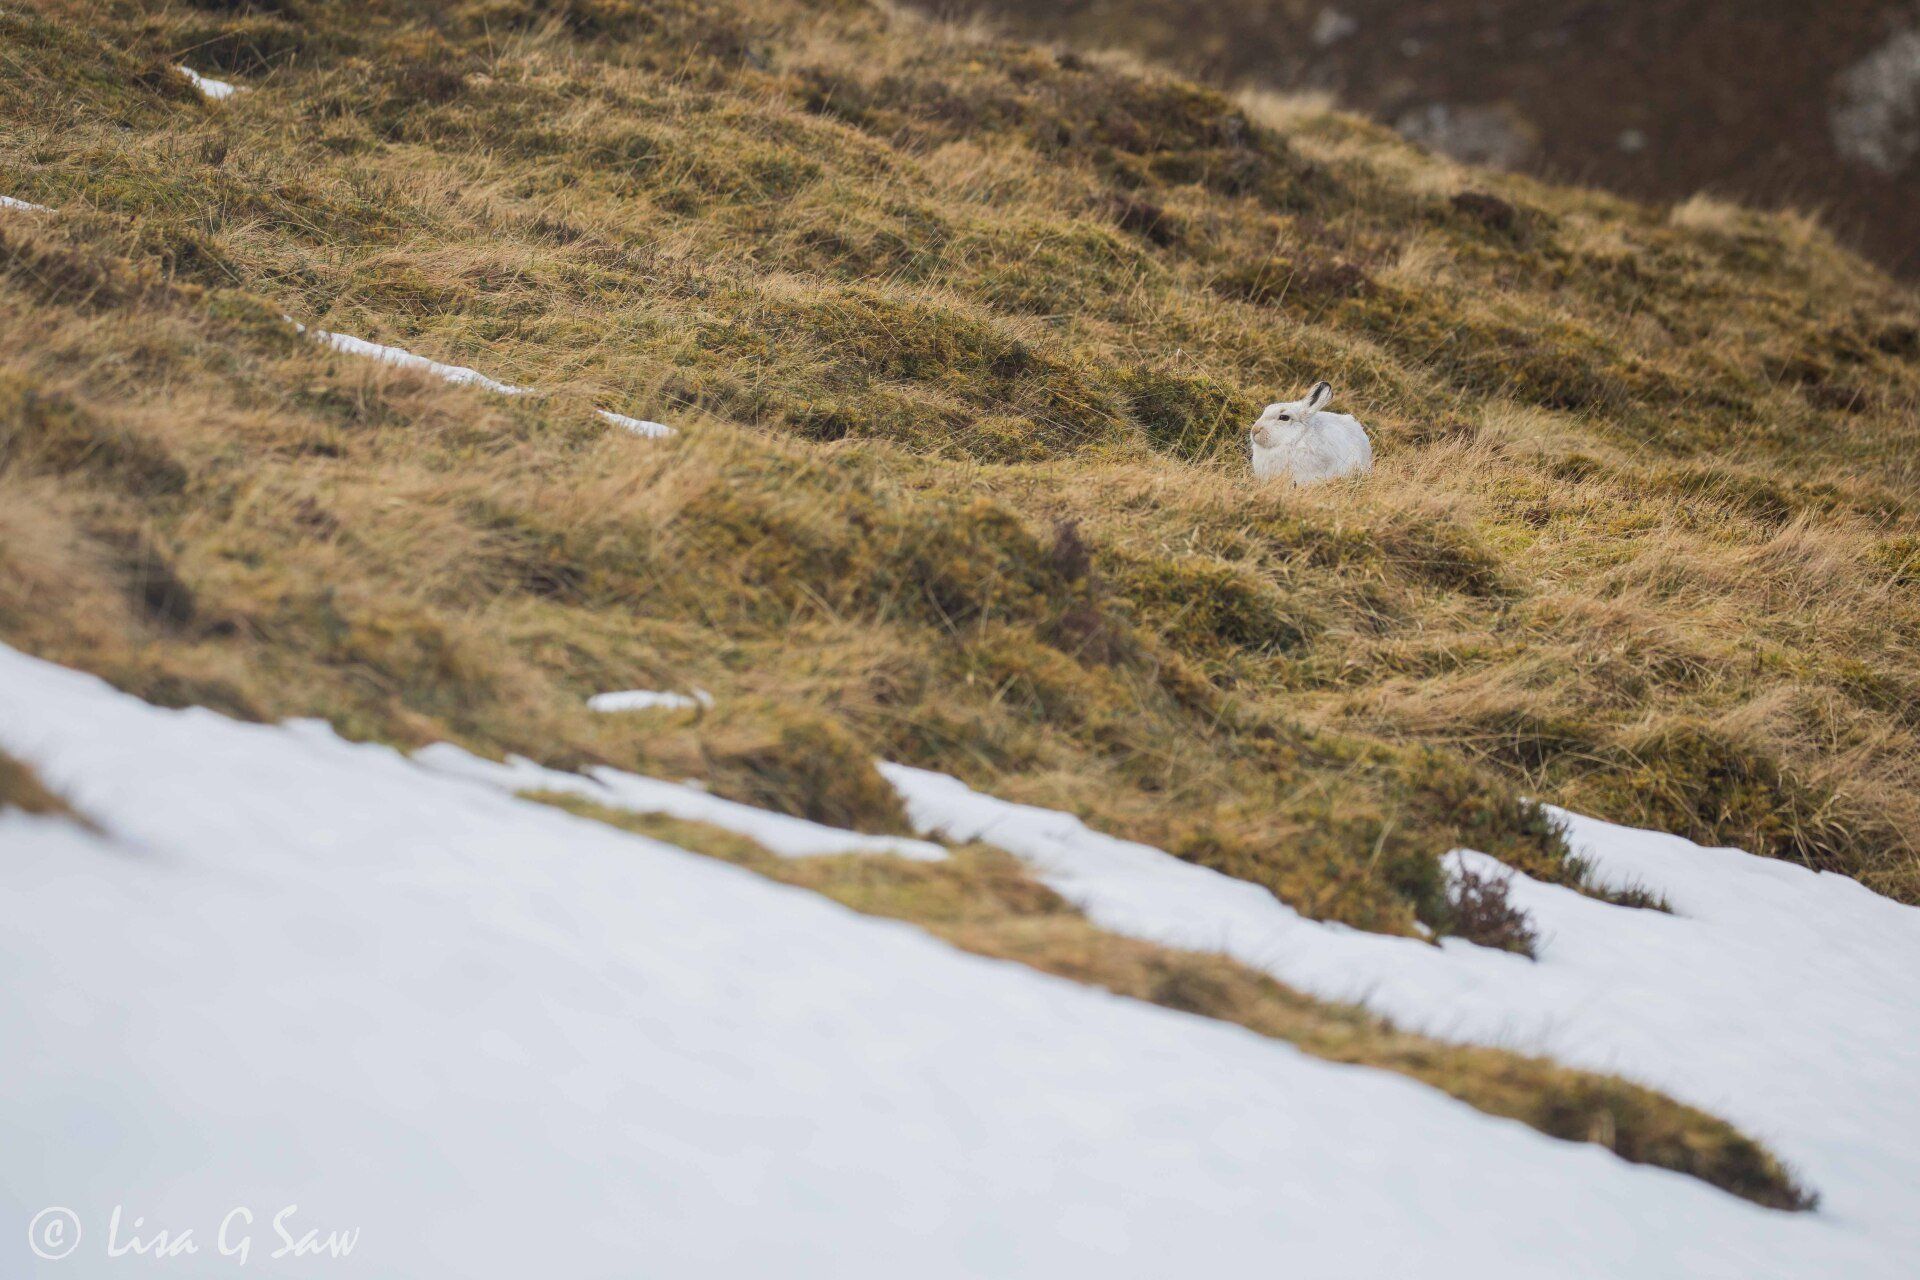 White Mountain Hare in grass with patches of snow